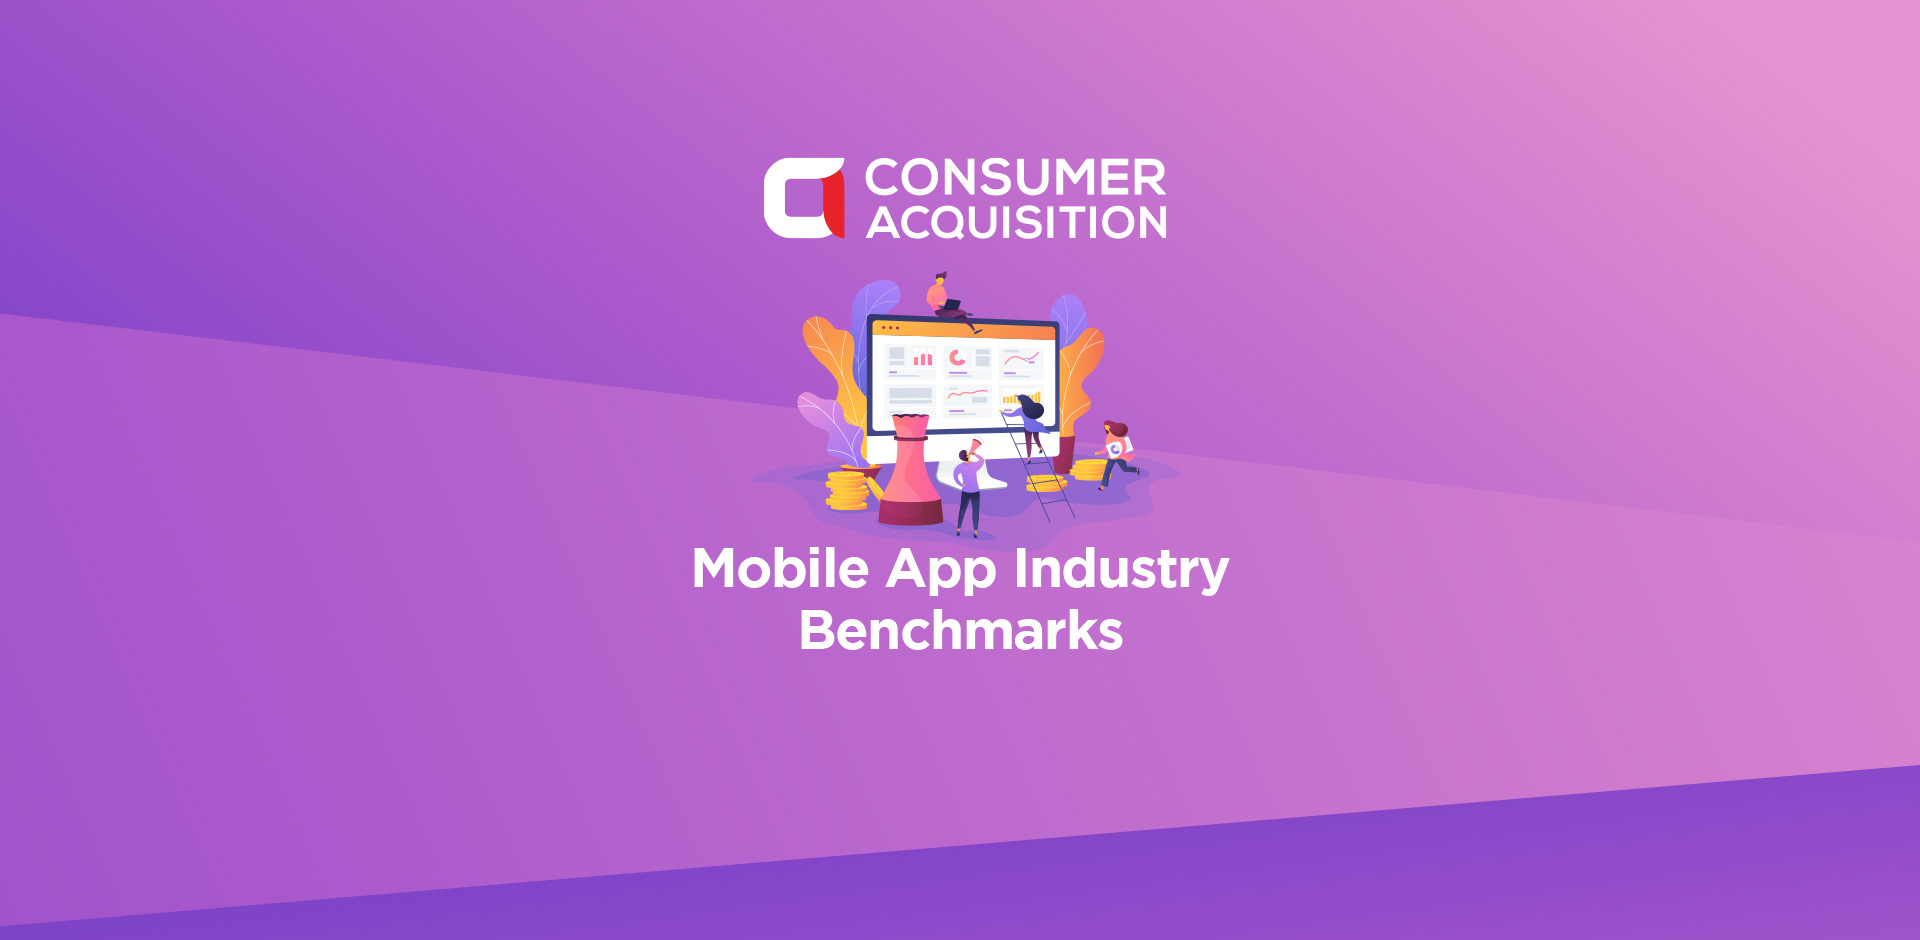 See Mobile App Industry Benchmarks — FREE!